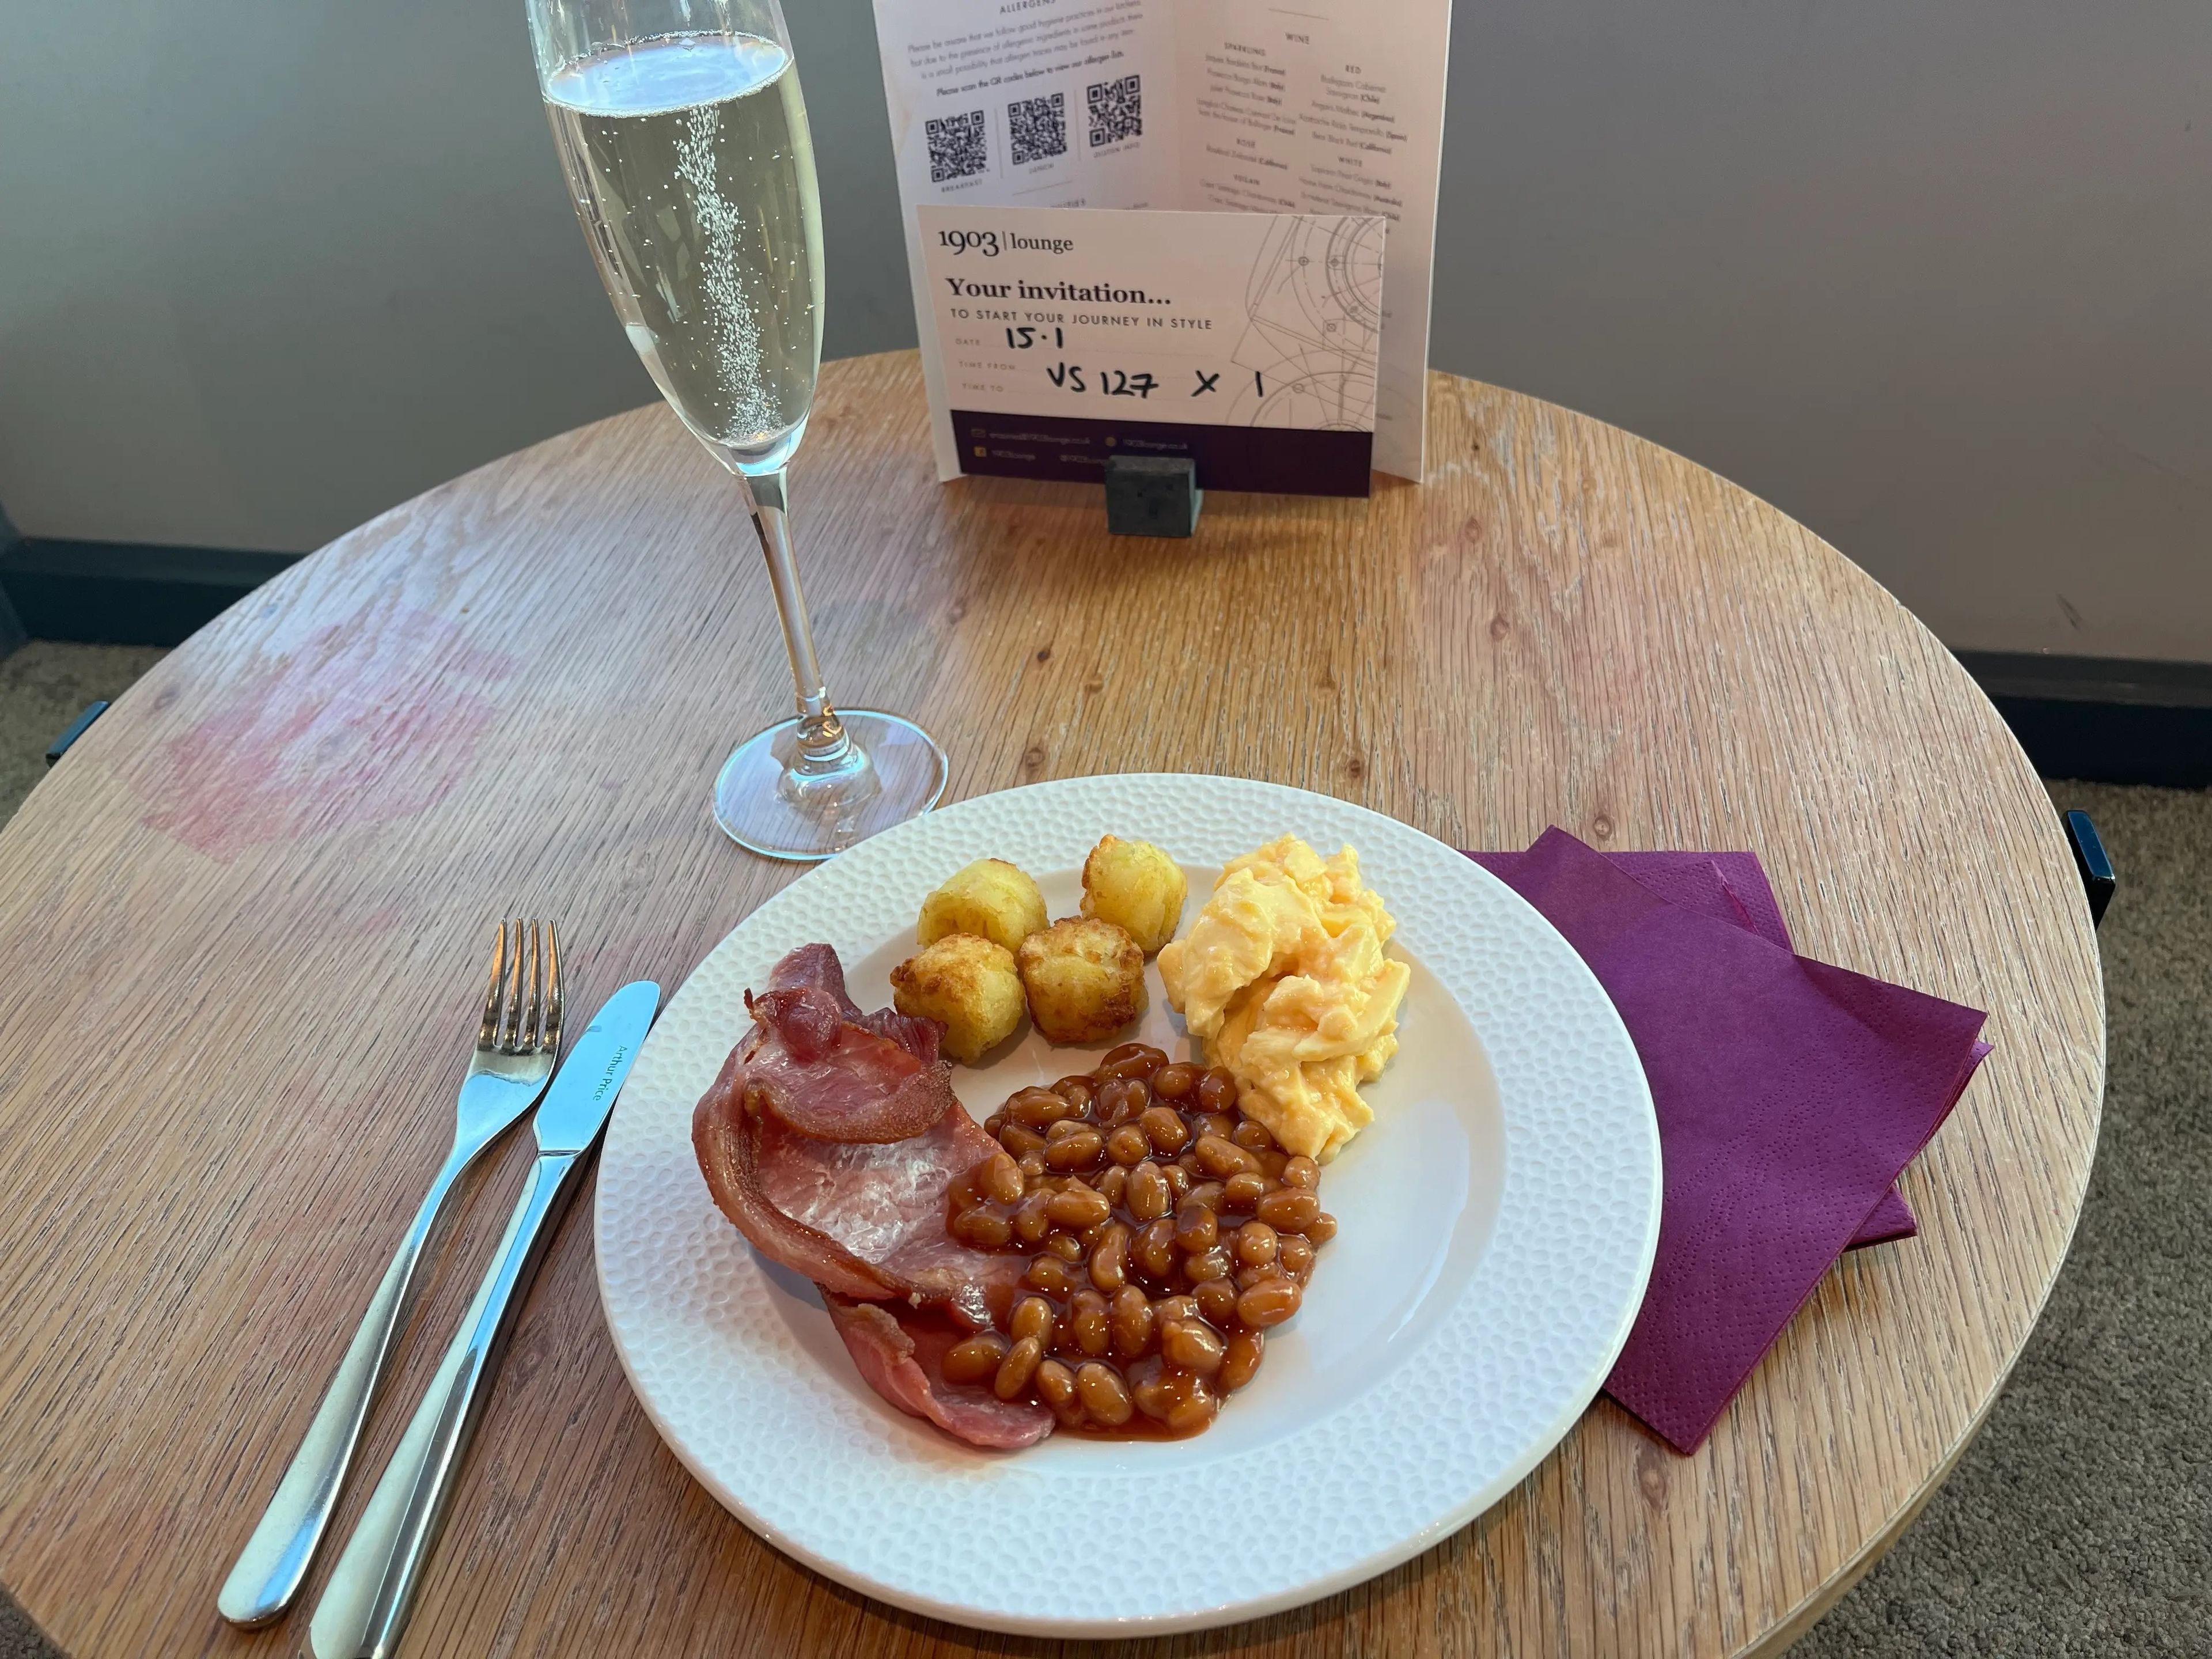 Round circular faux wooden table with a glass of sparking wine and a white plate of ham, baked beans, scrambled eggs, and tater tots